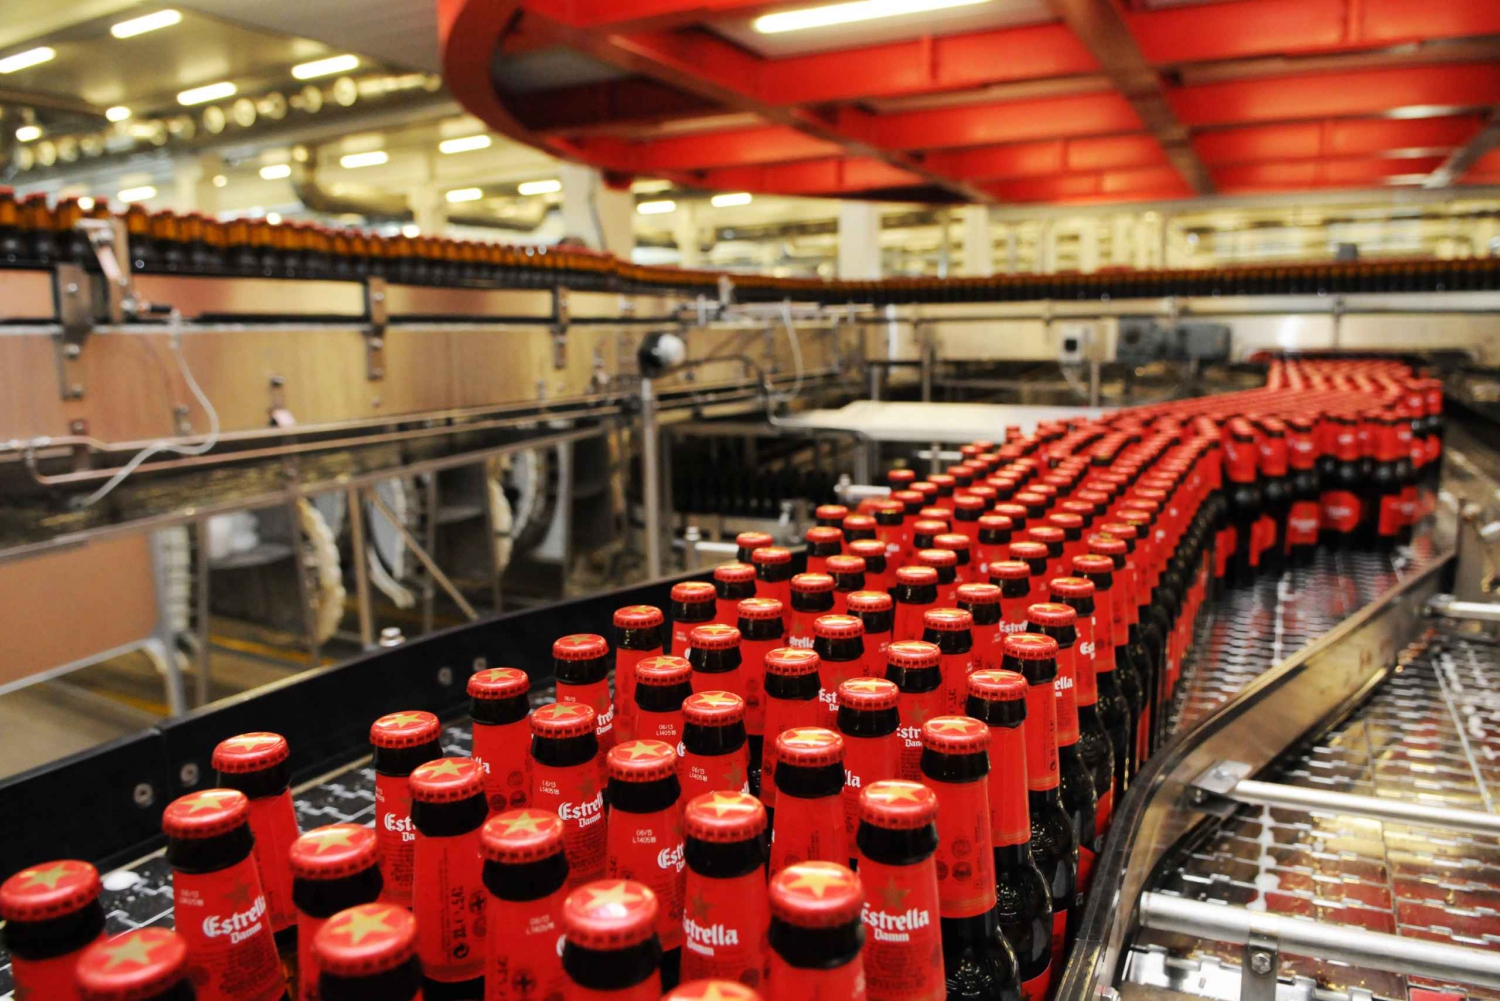 Barcelona: Estrella Damm Brewery Guided Tour with Tasting